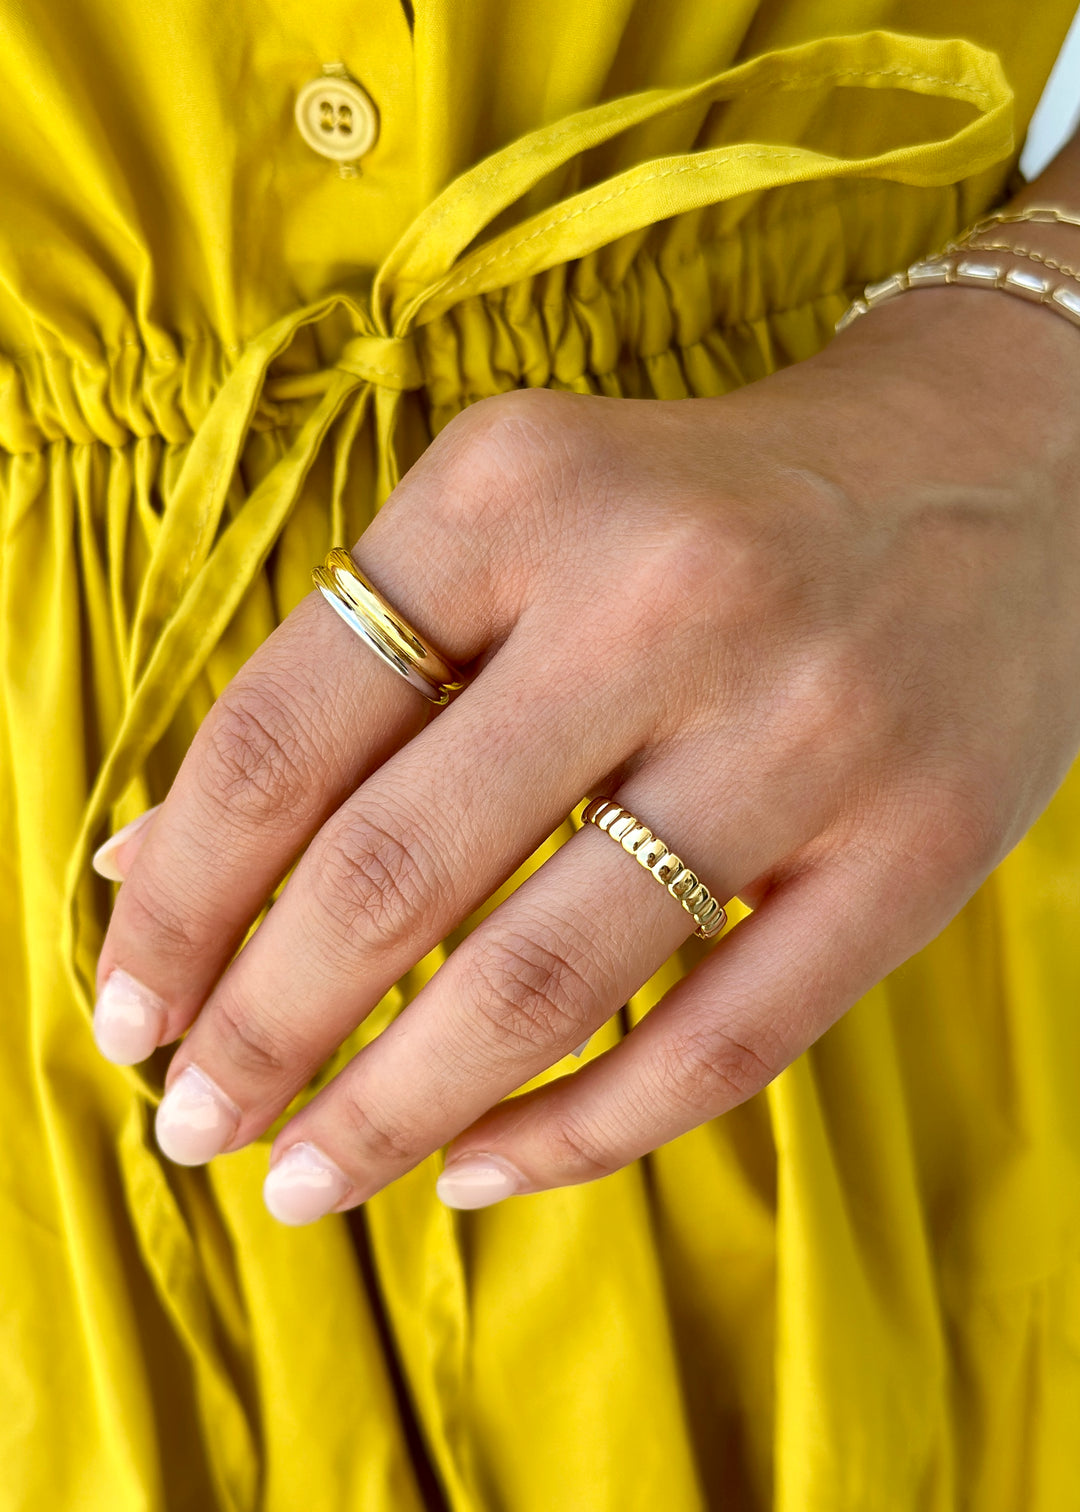 Smooth Two-Tone Ring